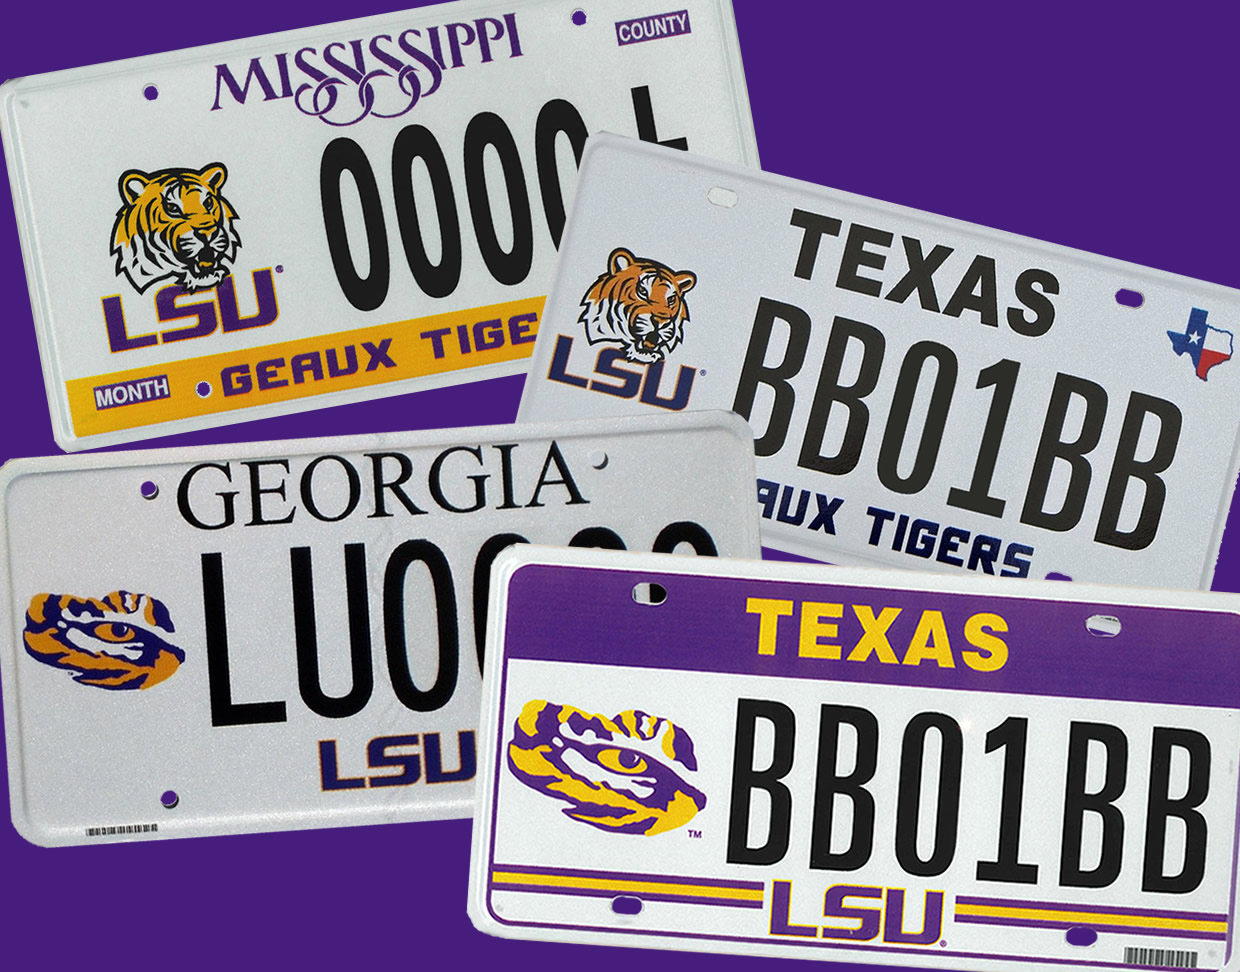 Inga Lsu Mississippi License Plate Vanity Tag Sign College Louisiana Football Tigers License Plate Signs 6x12 inches 